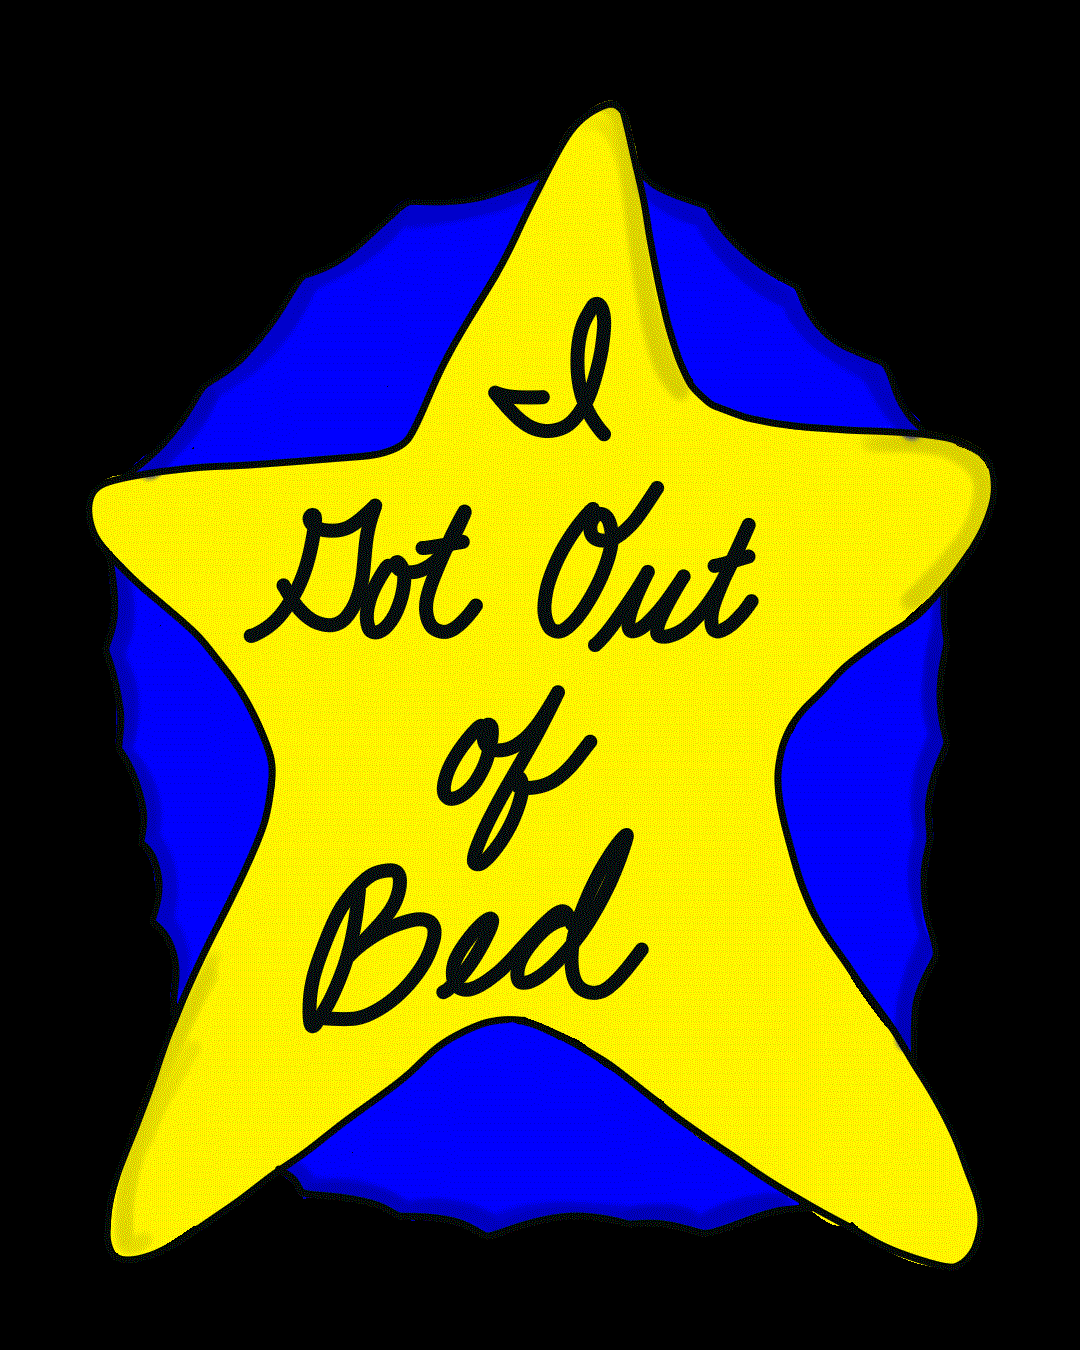 Gold star reading "I Got Out of Bed"